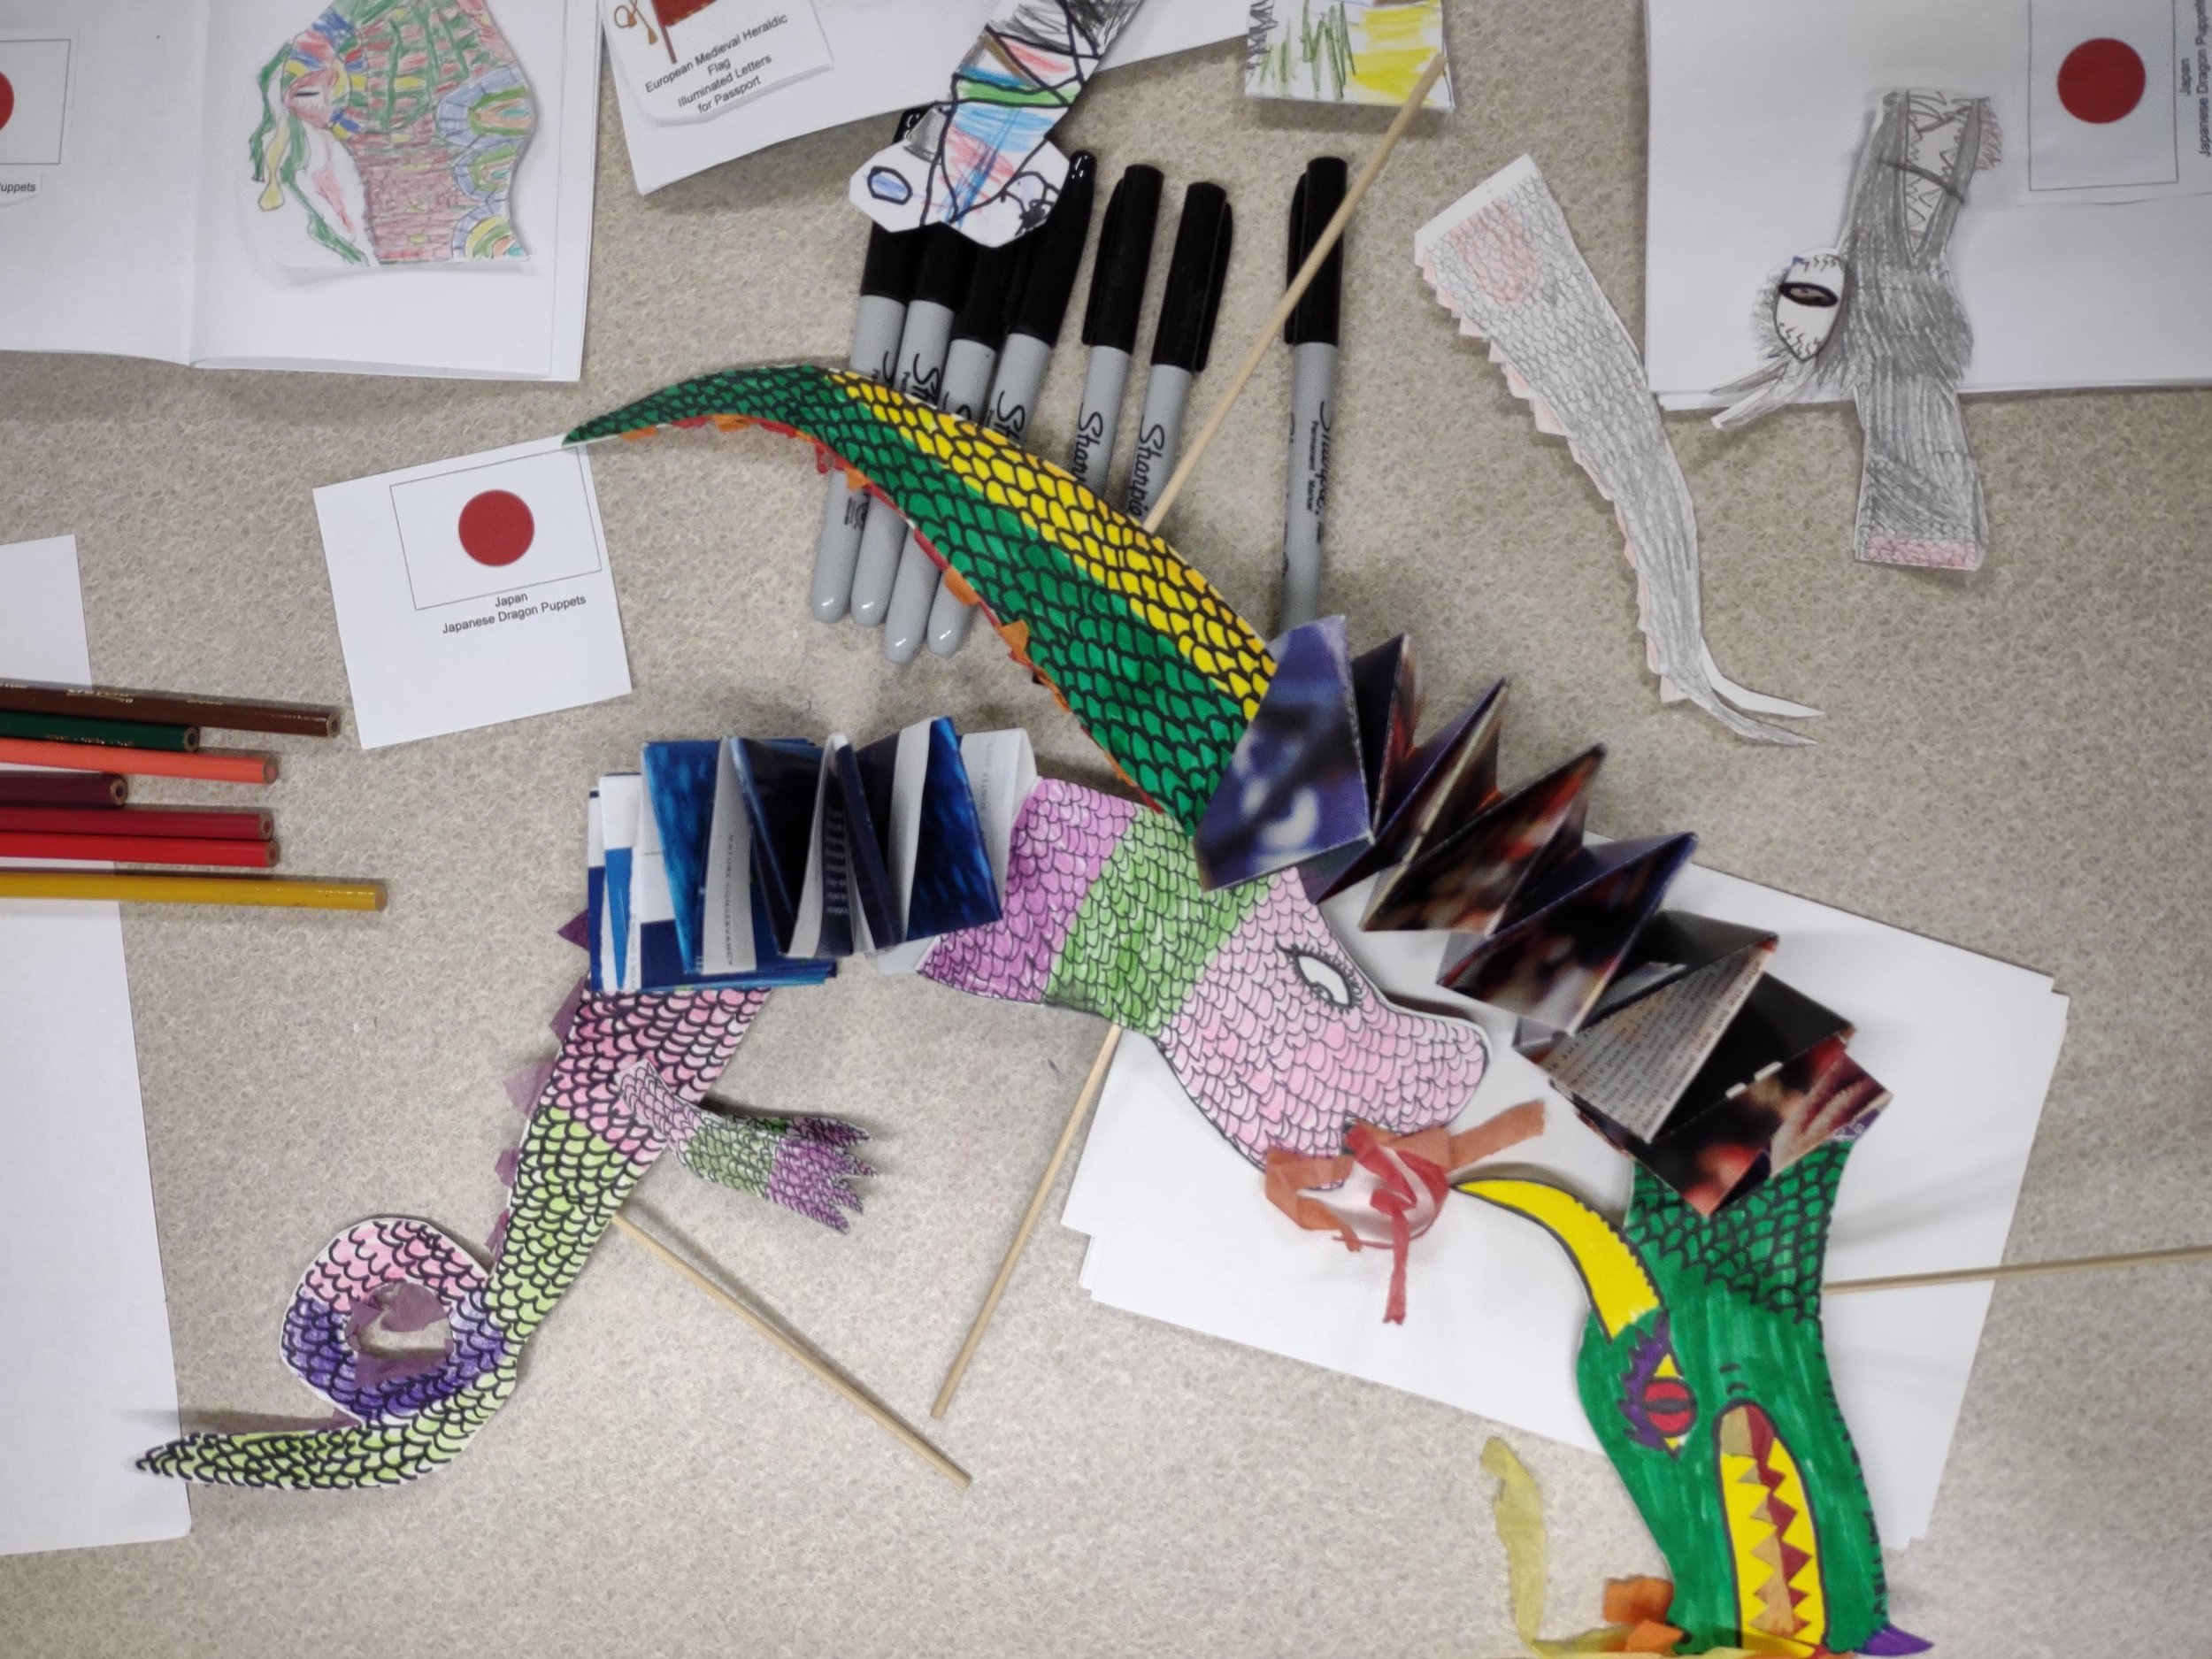 Working on Japanese Dragon Puppets